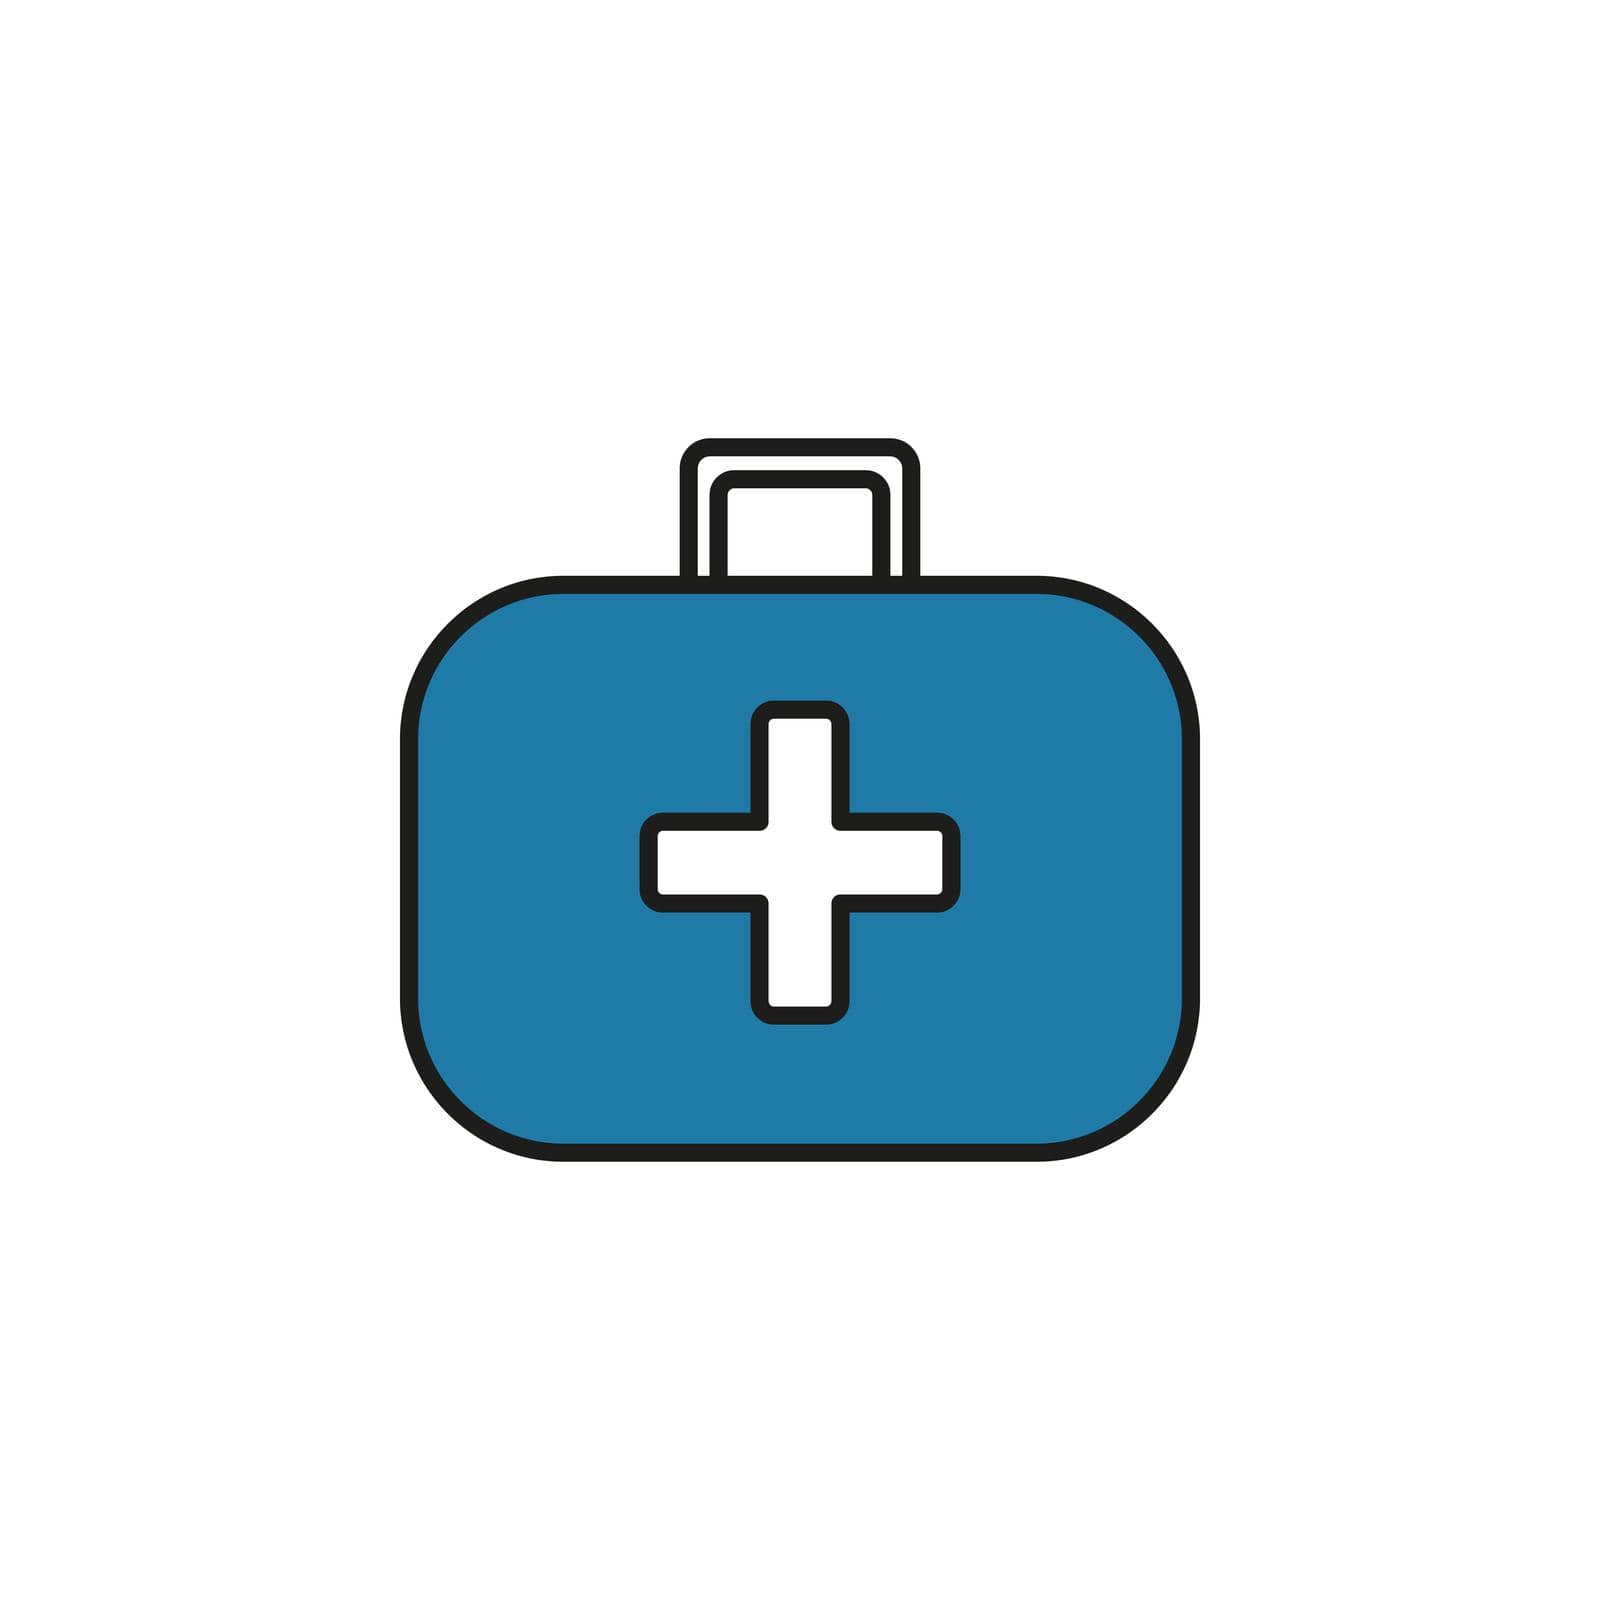 Paramedic medical suitcase line icon vector illustration. Medical bag. Chest with medicines and first aid supplies. Simple outline image of first aid kit